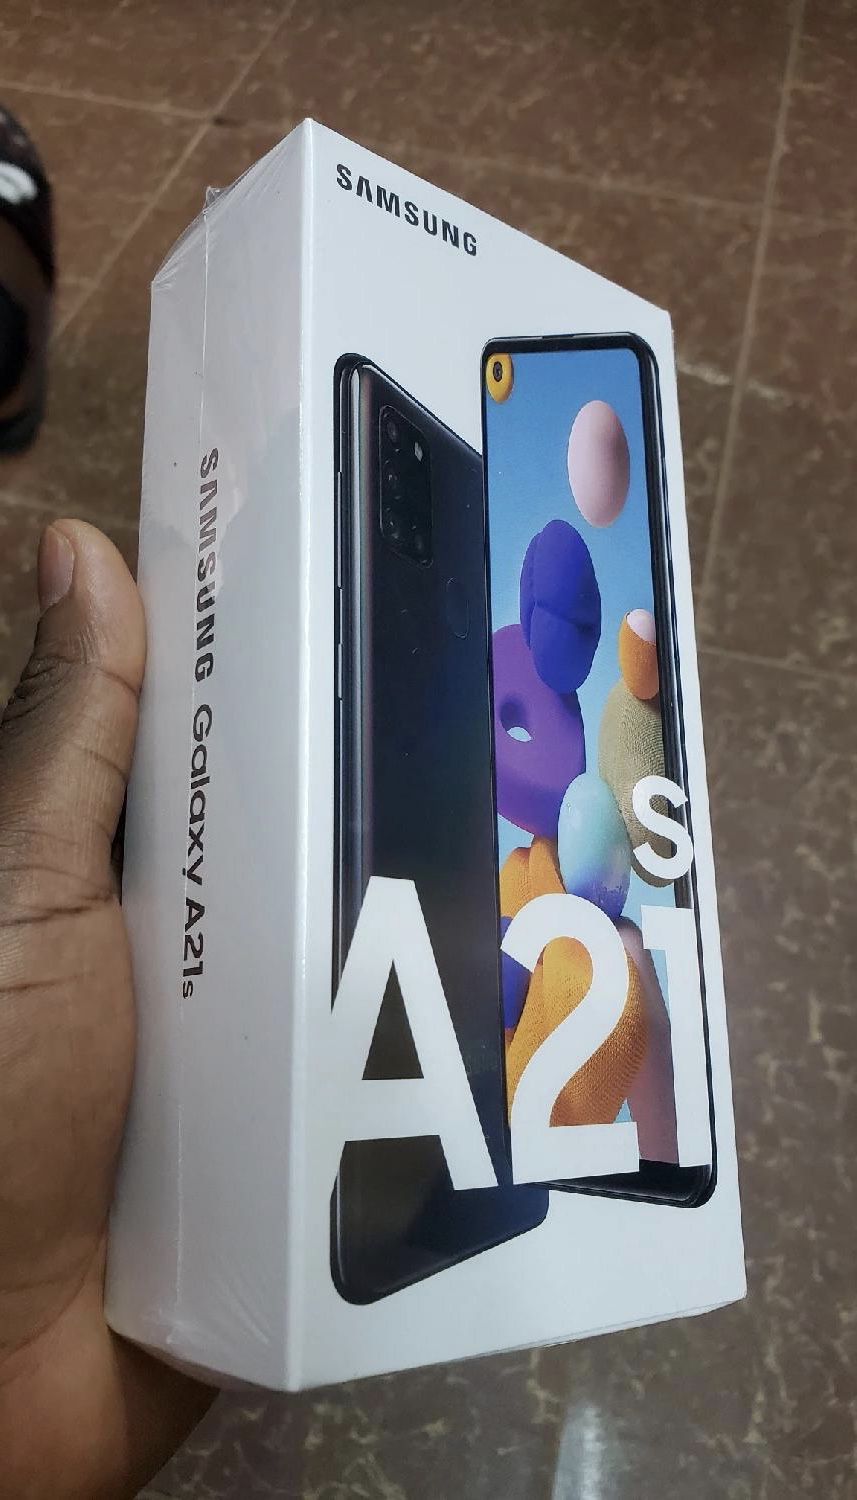 FREE New Samsung Galaxy A21 when you switch to Boost Mobile